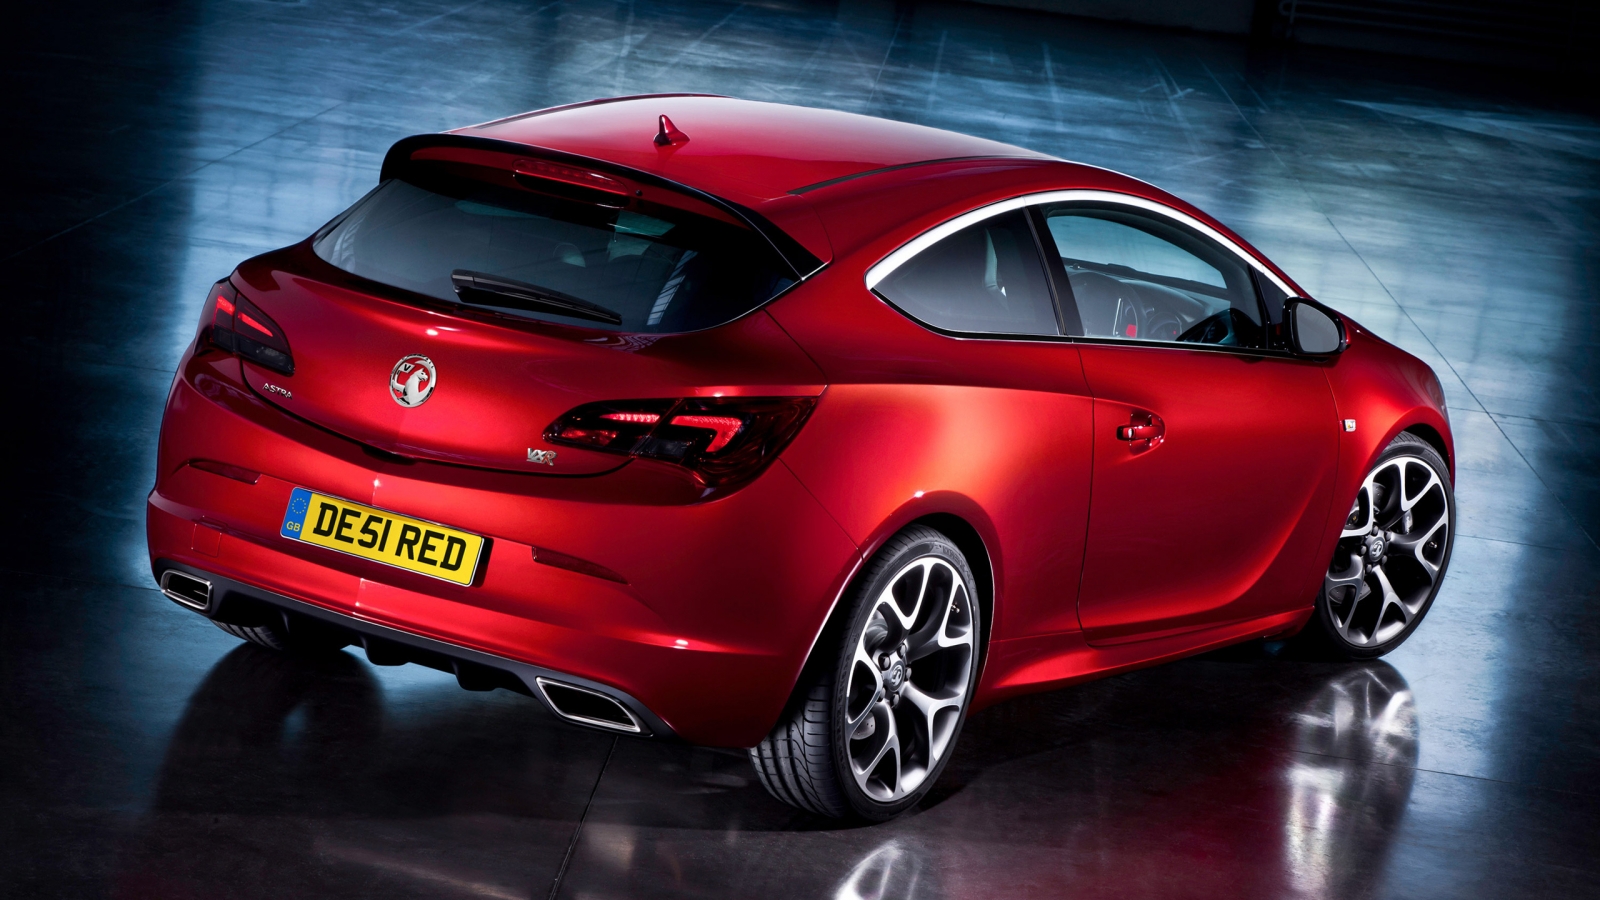 Vauxhall Astra GTC Rear for 1600 x 900 HDTV resolution